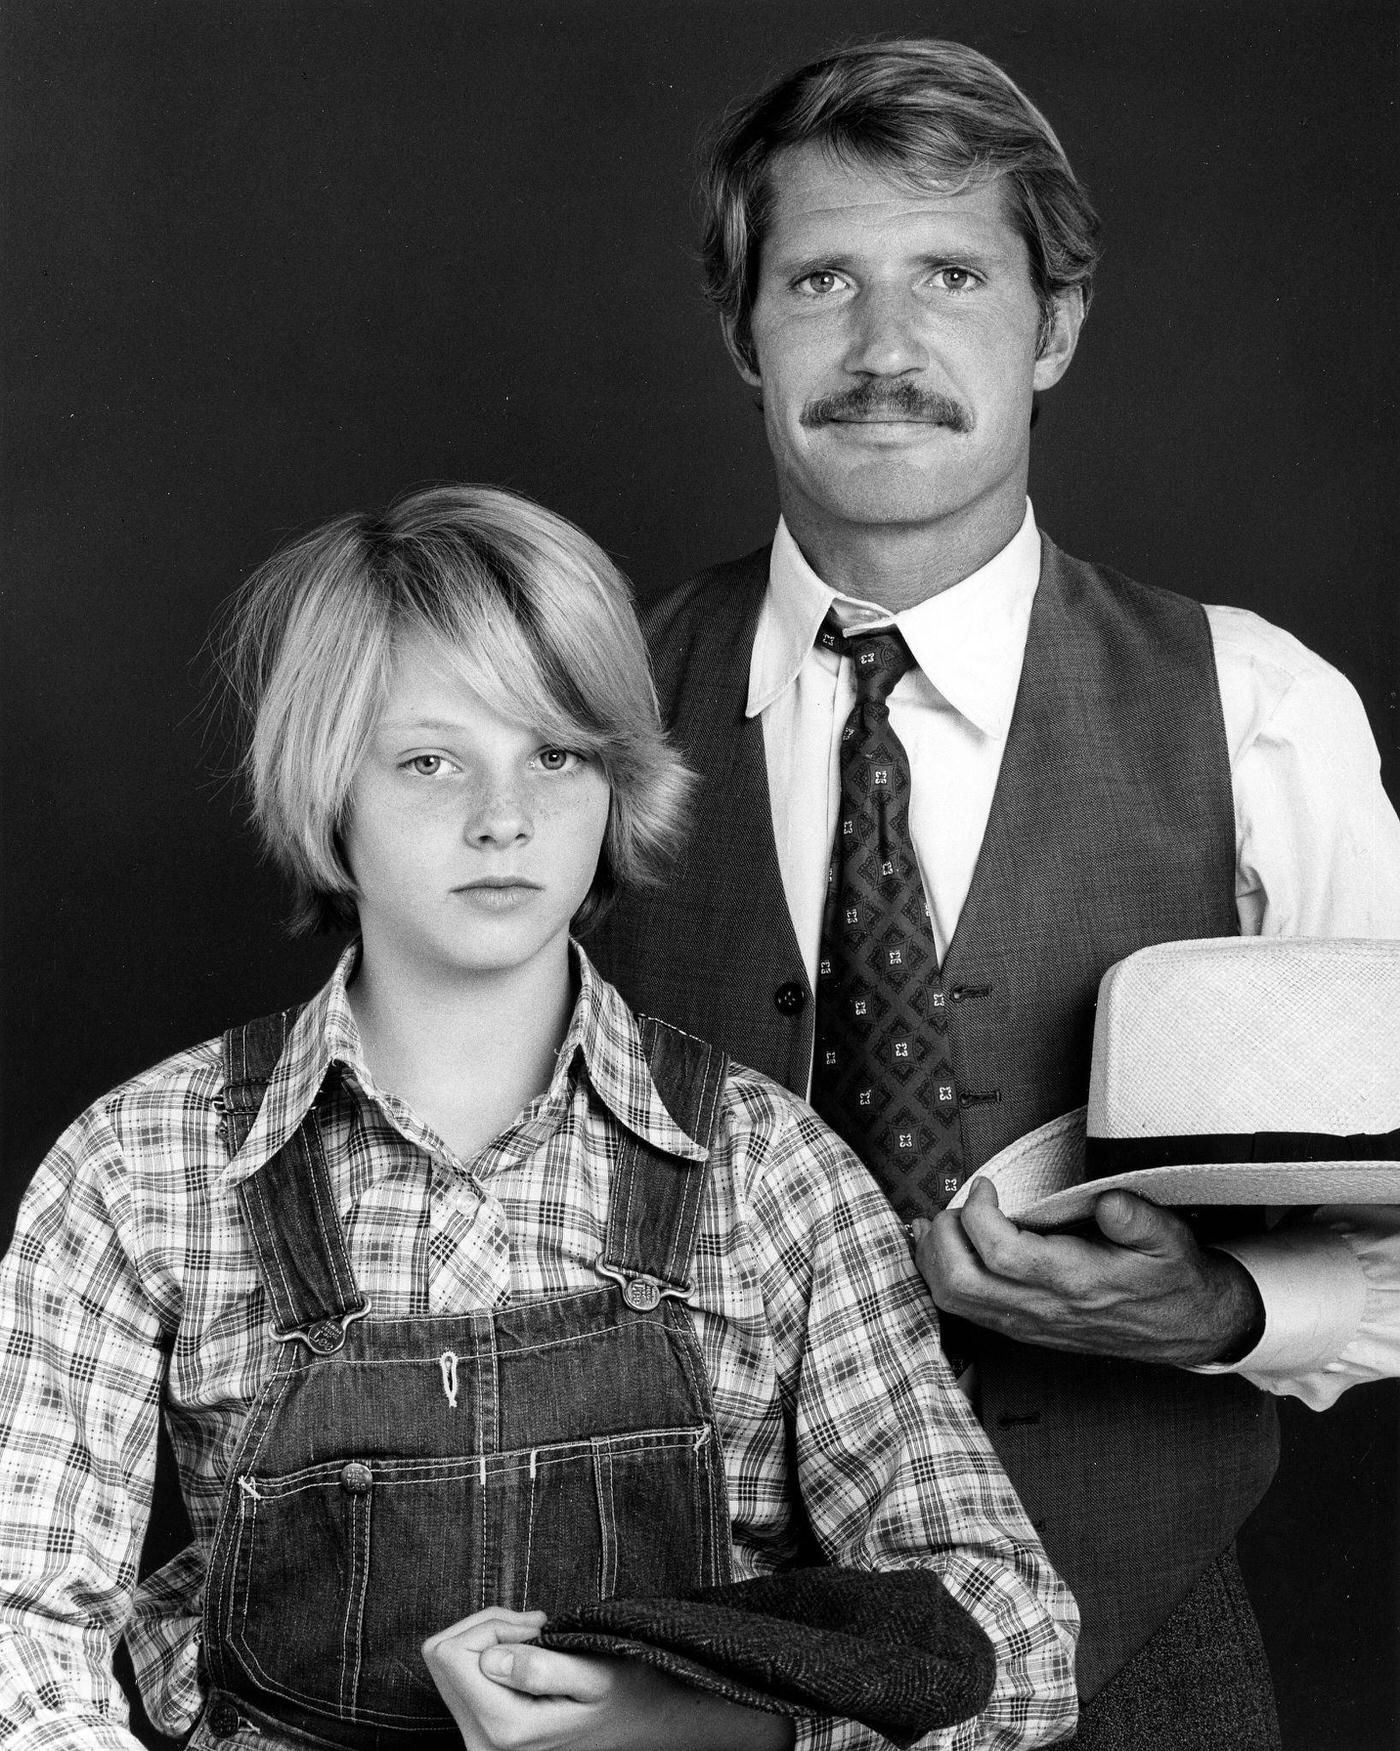 Jodie Foster and Christopher Connelly in 'Paper Moon', May 28, 1974.